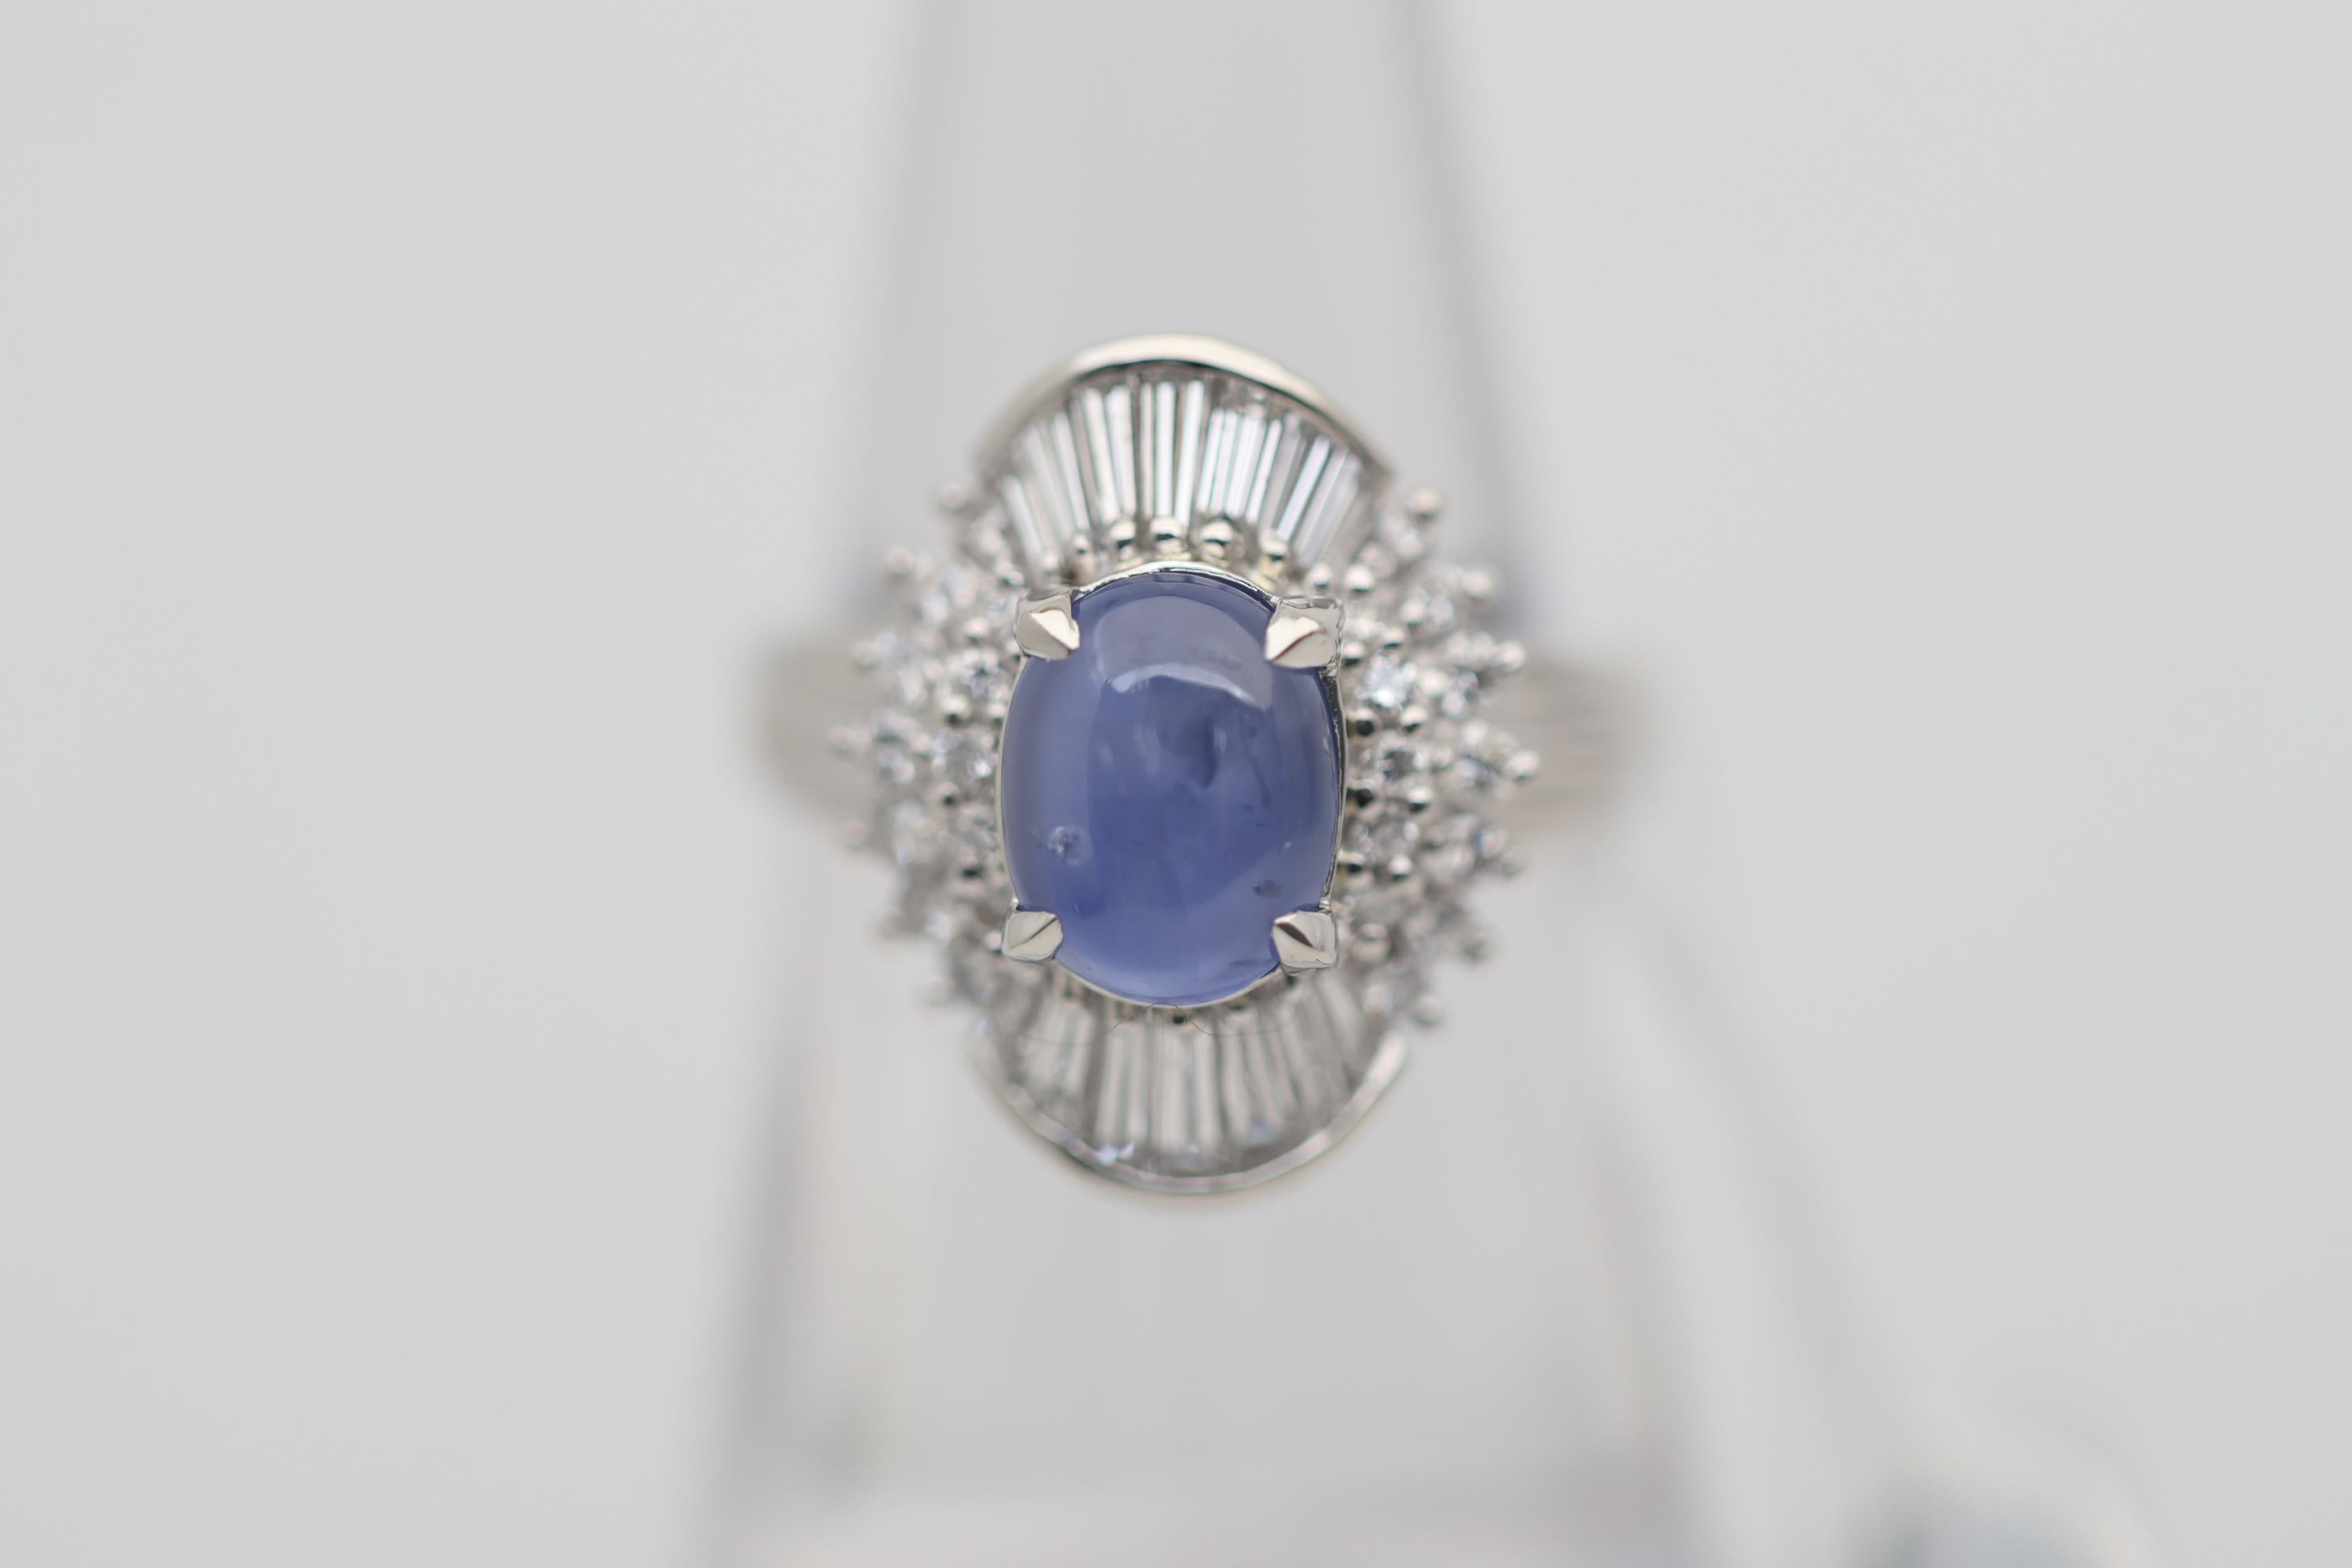 A beautiful 3.47 carat star sapphire takes center stage. It has a clean open blue color along with a 6-rayed star when a light hits the top of the stone. It is complemented by 0.90 carats of round brilliant and baguette-cut diamonds set around the